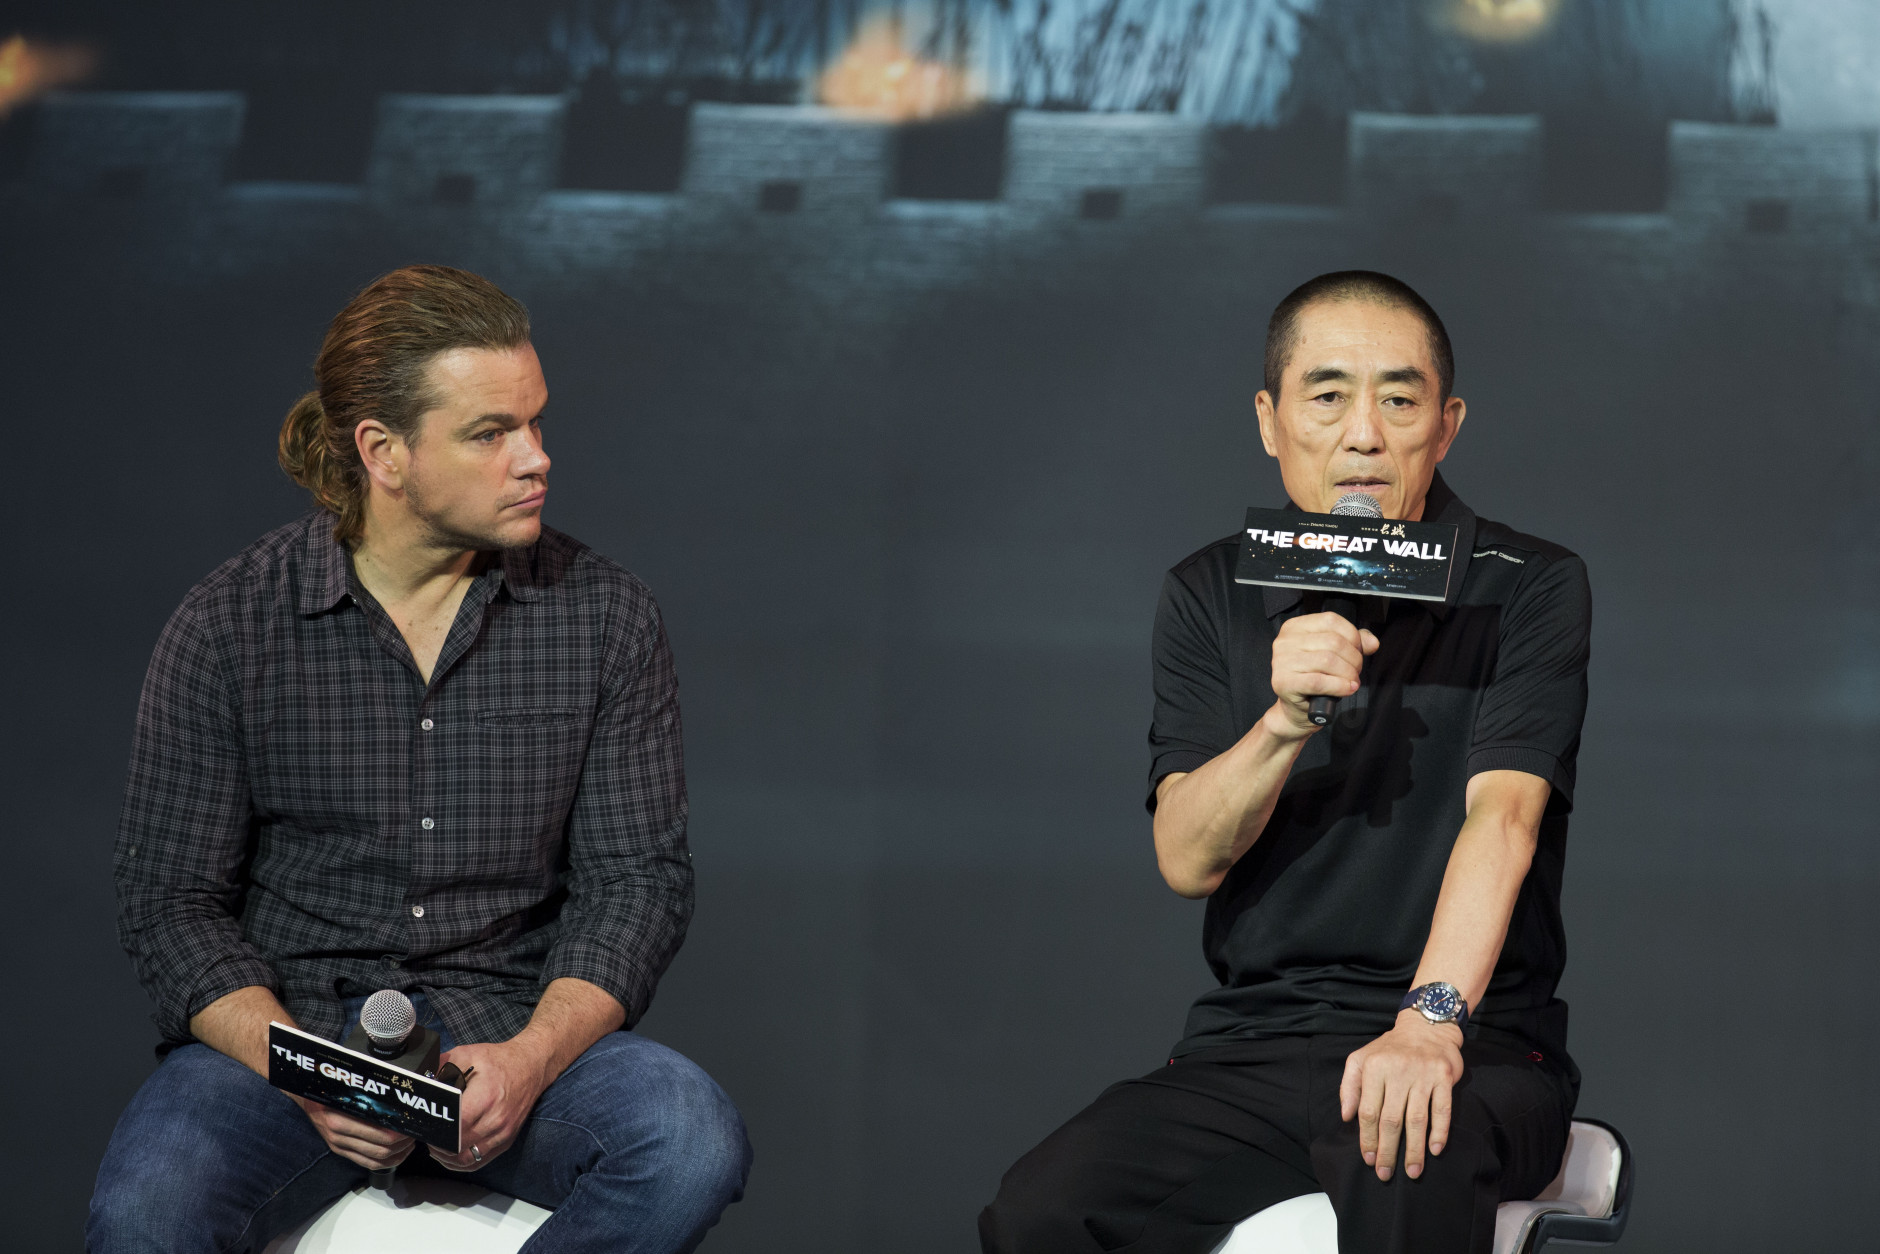 Movie director Zhang Yimou, right, speaks next to actor Matt Damon during a press conference of their latest movie The Great Wall held at a hotel in Beijing, China, Thursday, July 2, 2015.  (AP Photo/Andy Wong)